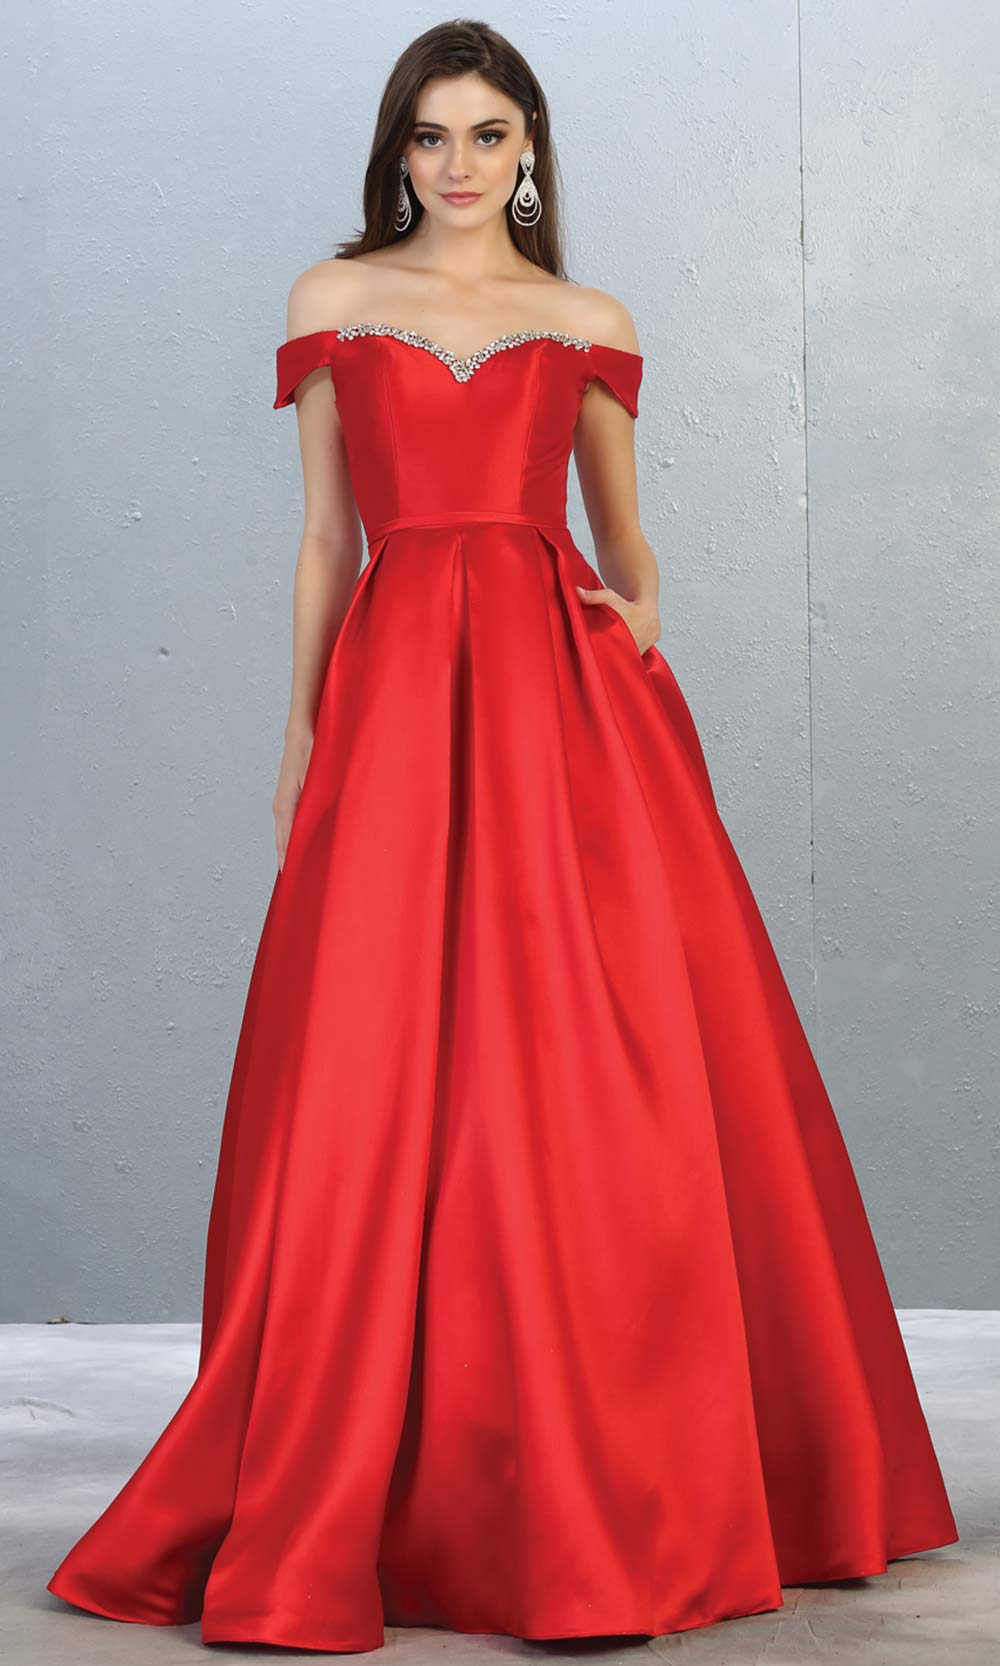 Mayqueen MQ 1784 long red off shoulder evening flowy dress. Full length red satin taffeta gown is perfect for  enagagement/e-shoot dress, formal wedding guest, indowestern gown, evening party dress, prom, bridesmaid. Plus sizes avail.jpg